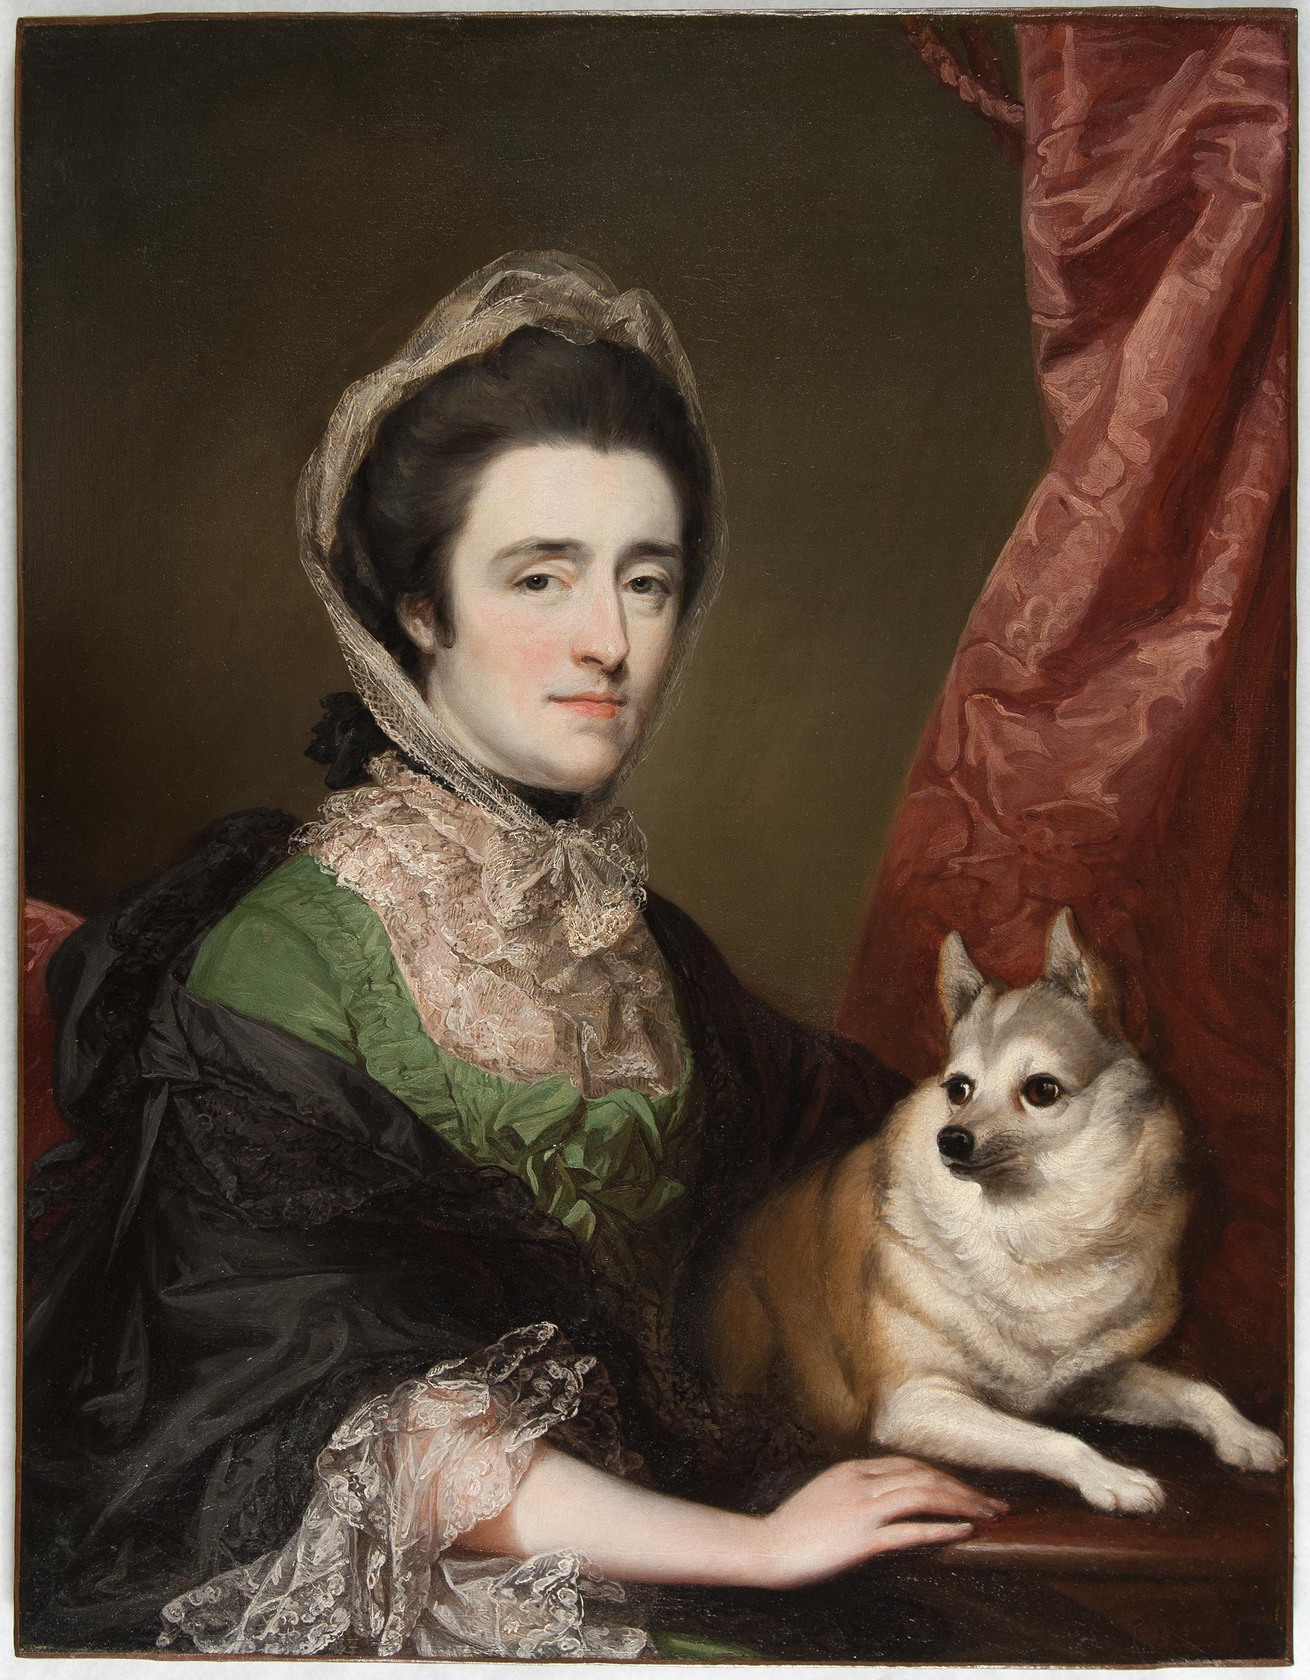 A woman wearing a shawl and hair covering sits with a small dog, looking at the viewer